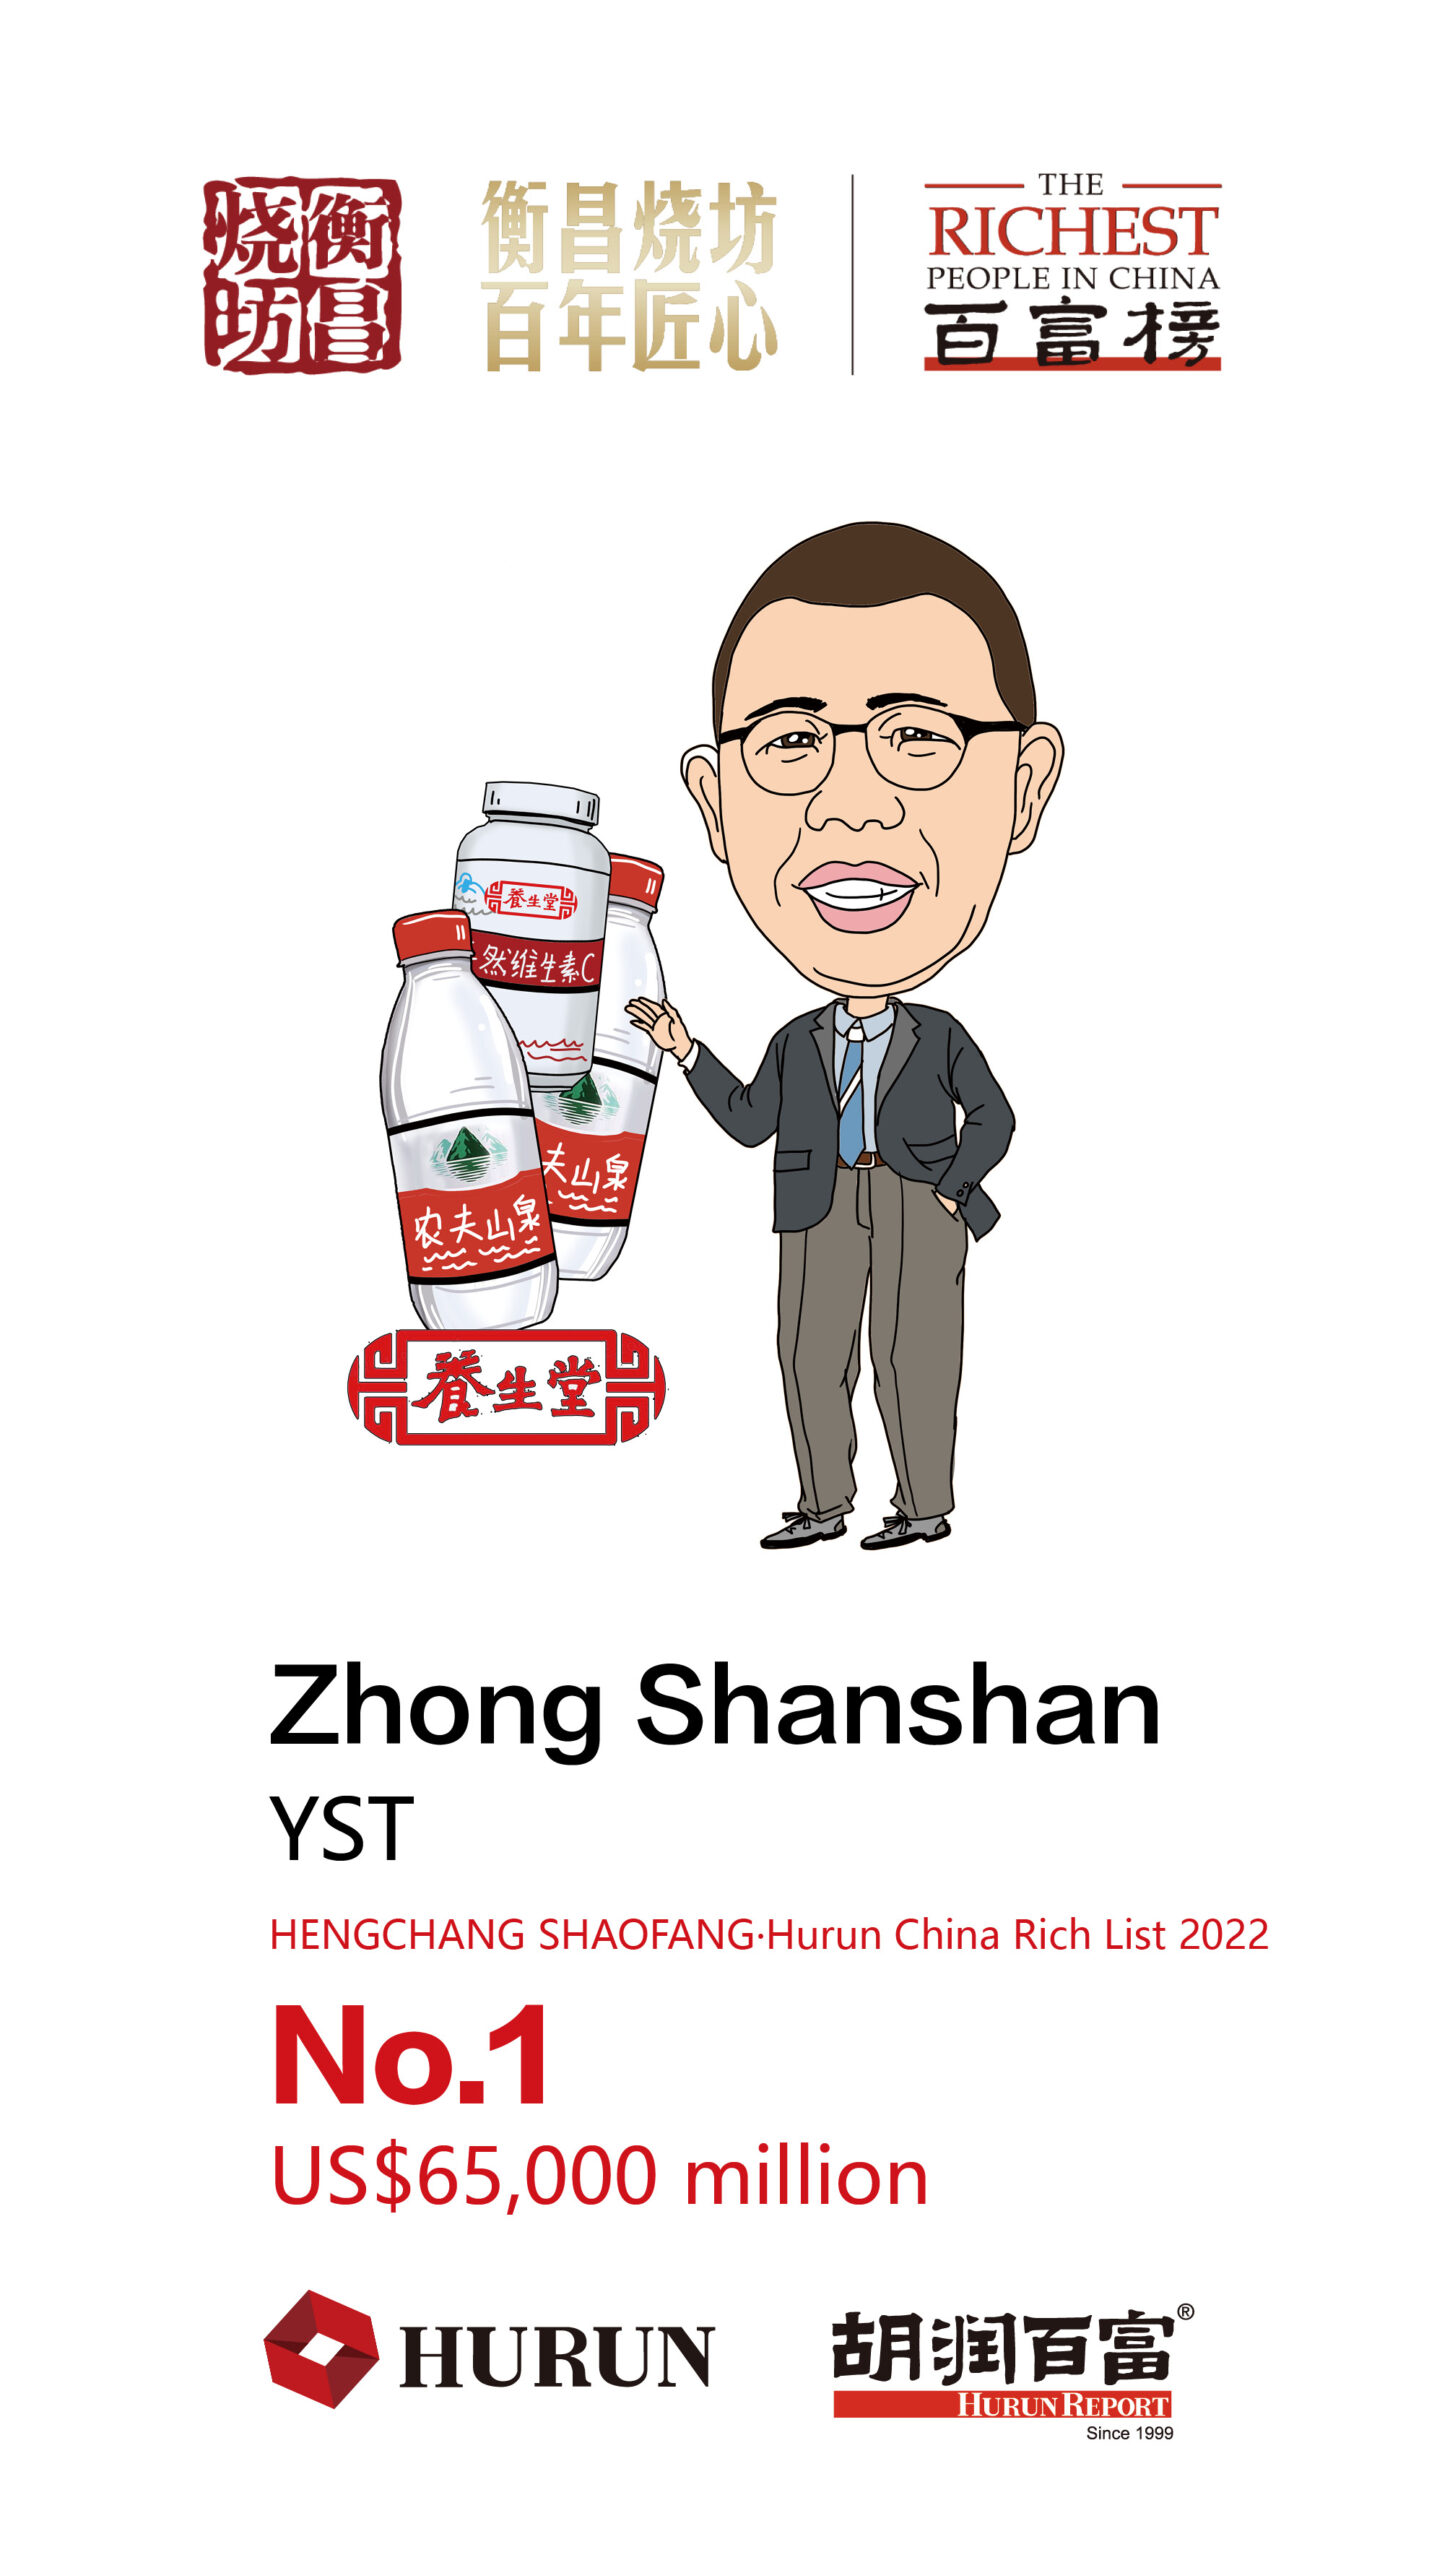 “Bottled Water King” Zhong Shanshan, 68, topped the Hurun China Rich List in 2022 for the second time with US$65bn, an increase of 17 percent. His two listed companies, Wantai Biological Pharmacy and Nongfu Spring, have both shown strong growth, with Wantai’s revenues and net profit more than tripling in the first half of this year compared with the same period last year. Nongfu Spring's revenues rose 30 percent last year, while net profit rose 36 percent. As of Sept. 15, Nongfu Spring's shares were up 20 percent from a year earlier. Nongfu Spring ranked 18th in the Hurun China 500 Most Valuable Private Companies 2021, and five shareholders made the rich list this year. Graphc: Hurun Research Institute